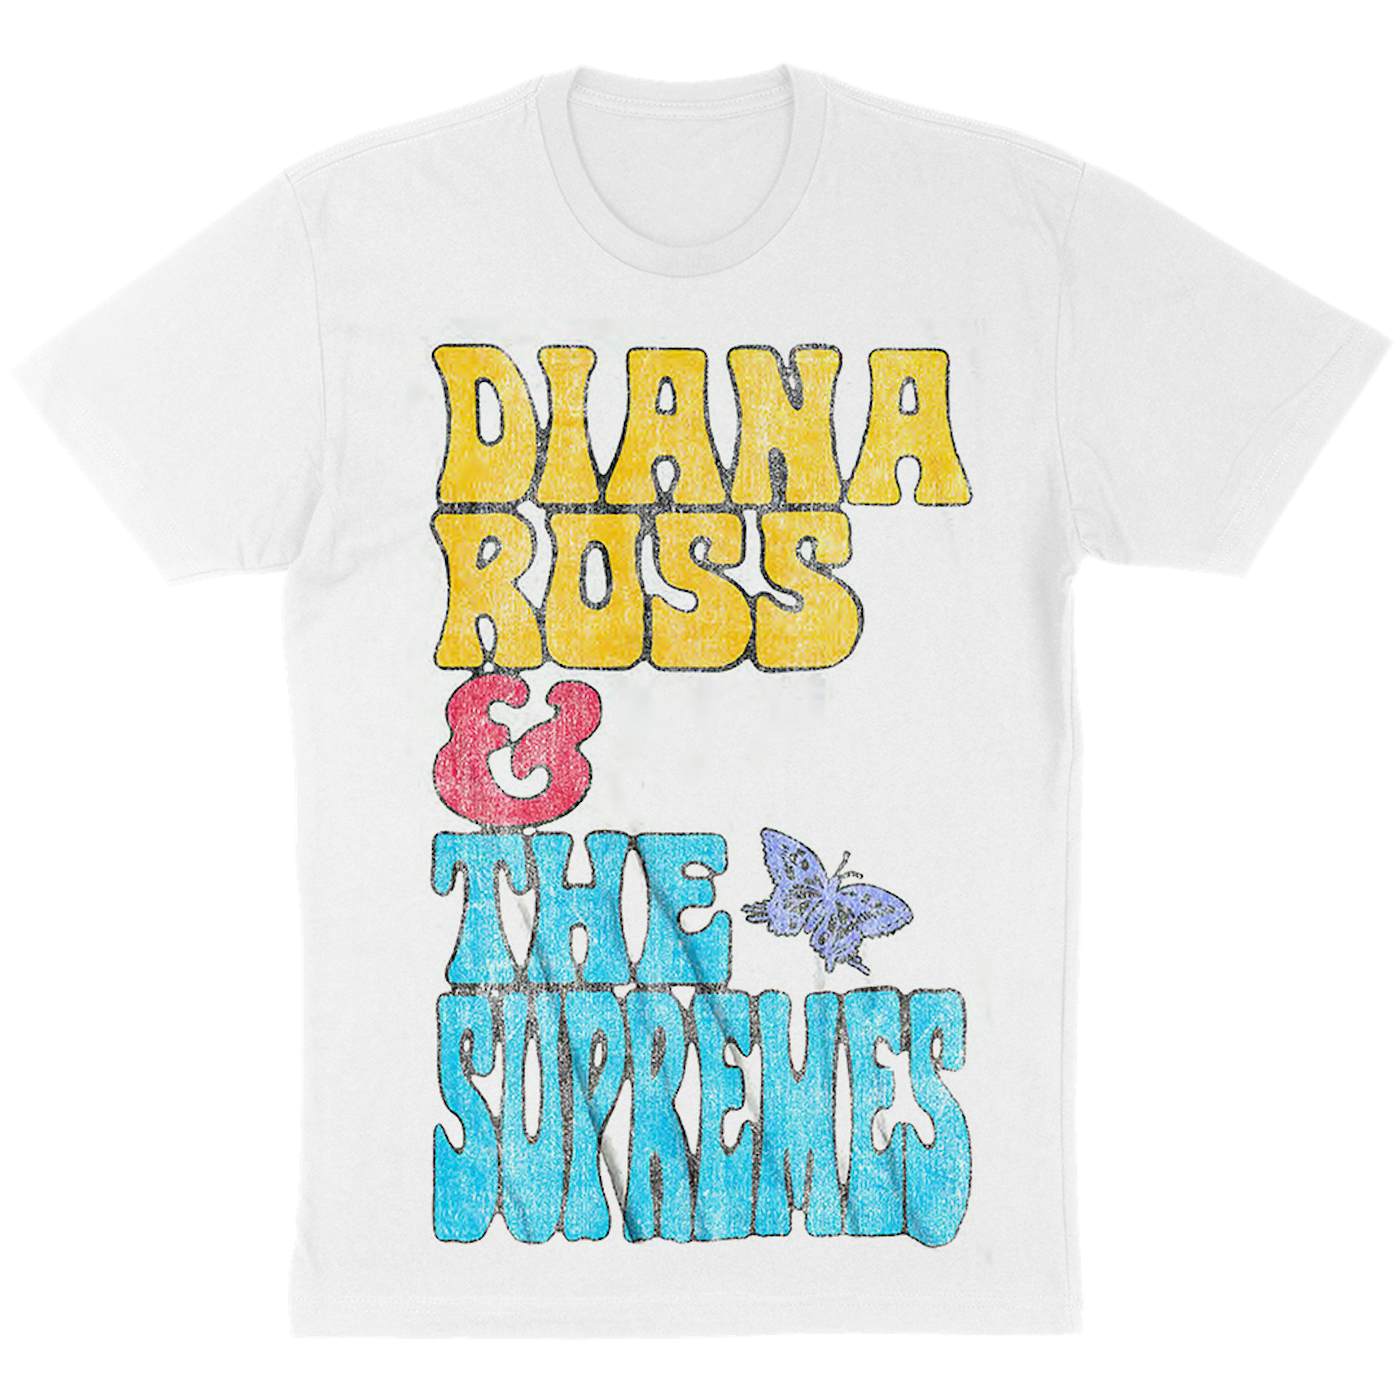 Diana Ross And The Supremes "Stacked Butterfly" T-Shirt in White